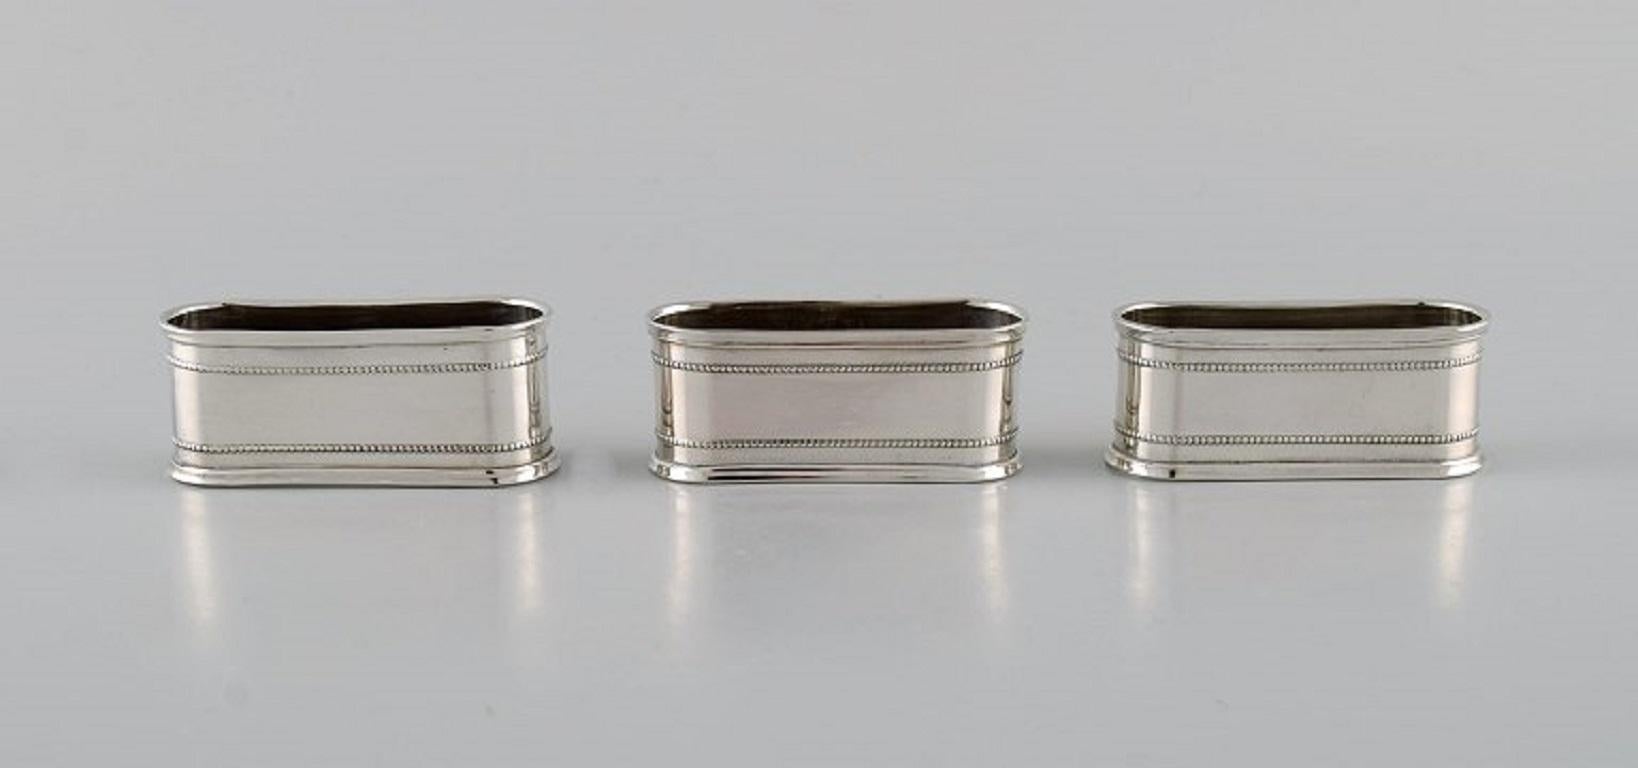 11 Sener napkin rings in silver 900, with beaded border. 
Turkey, 1930s / 40s.
Measures: 6.3 x 2.5 x 2.5 cm.
In excellent condition.
Stamped.
Our skilled Georg Jensen silversmith can polish all silver and gold so that it appears new. The price